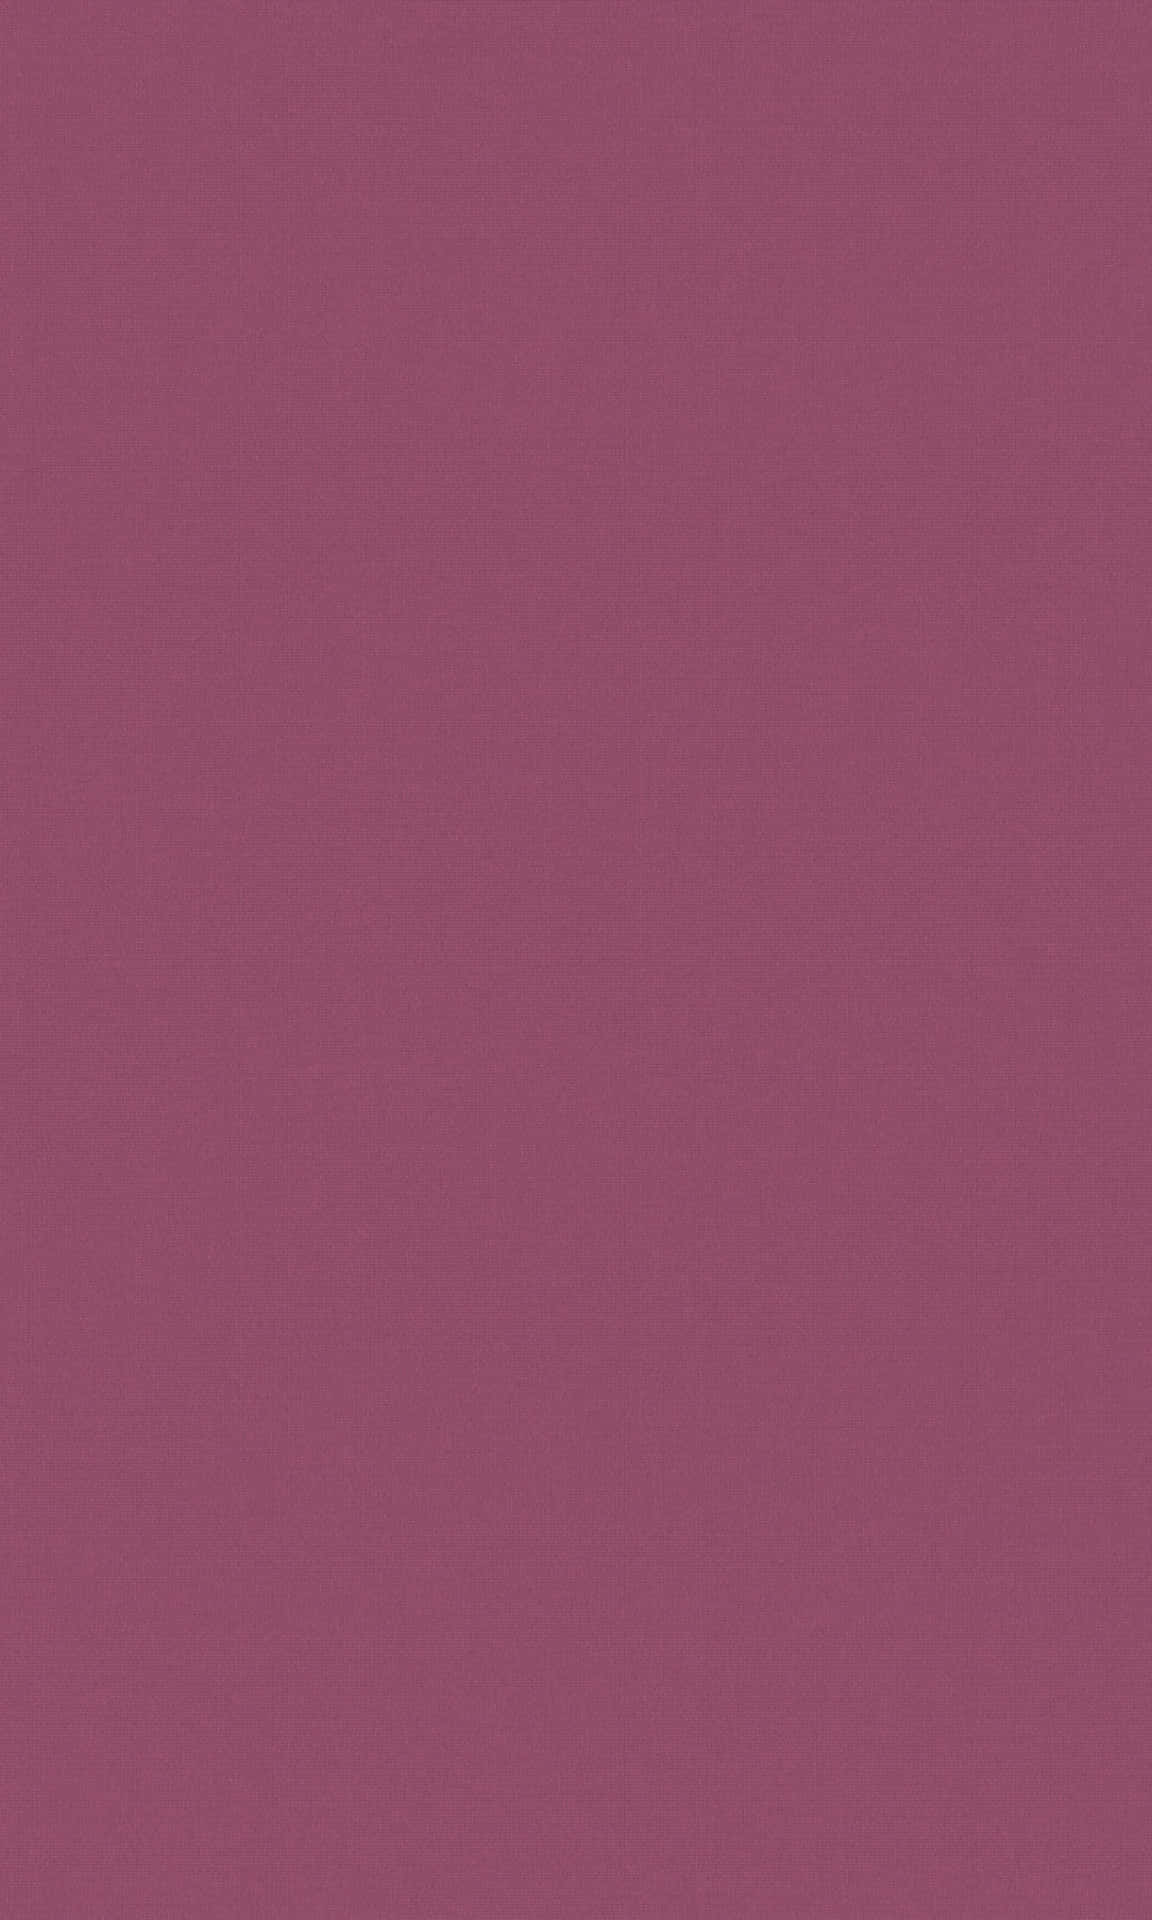 A Purple Background With A Plain Background Wallpaper